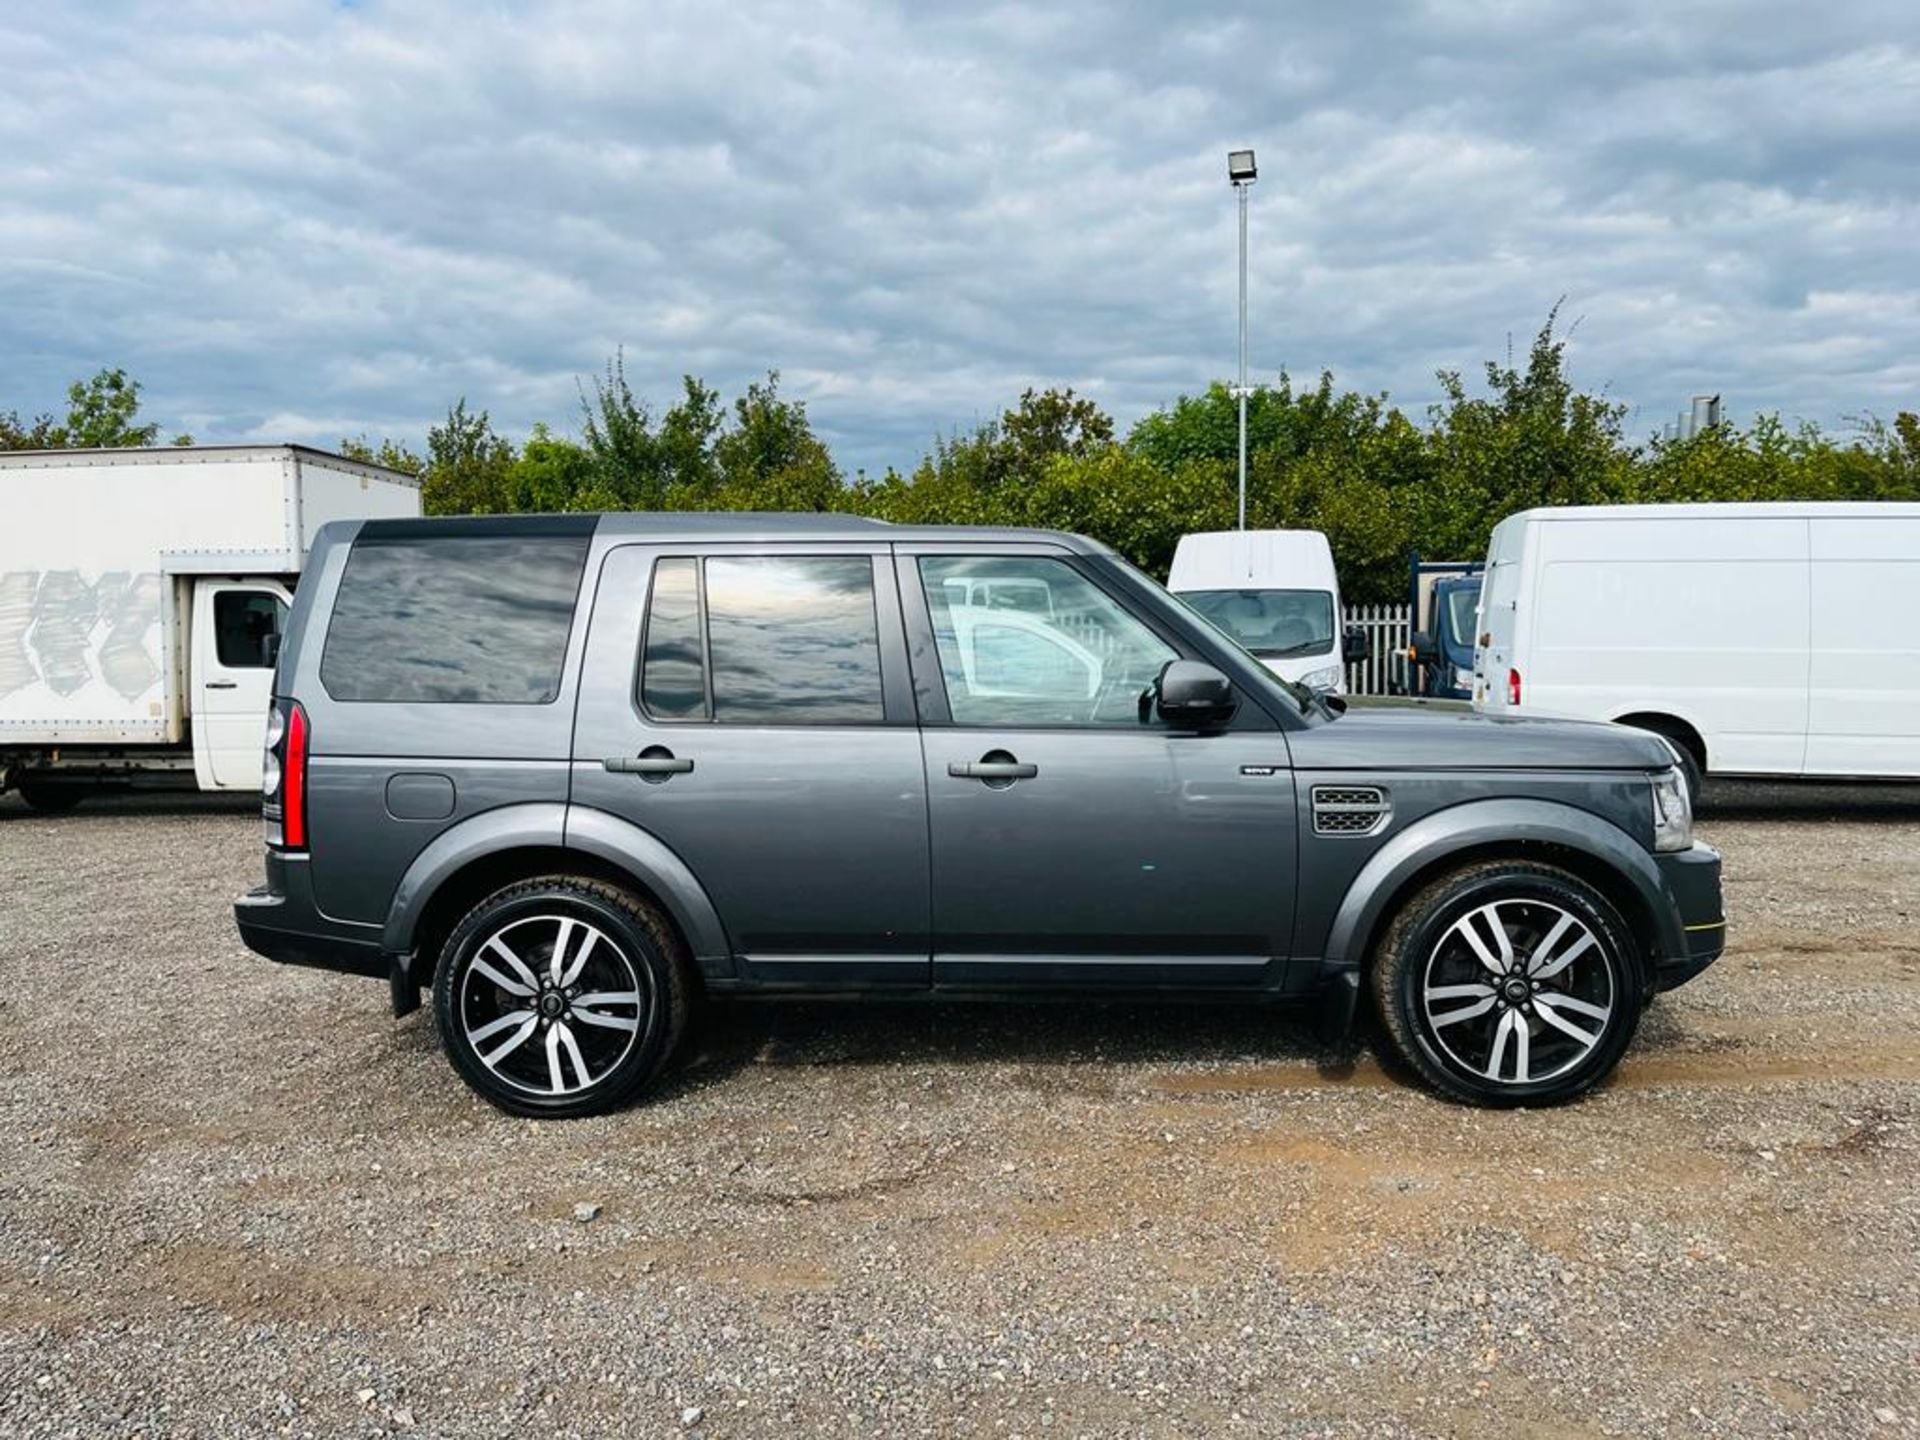 ** ON SALE **Land Rover Discovery 4 XS 3.0 SDV6 CommandShift Auto Commercial 2015 '65 Reg' - Sat Nav - Image 5 of 25